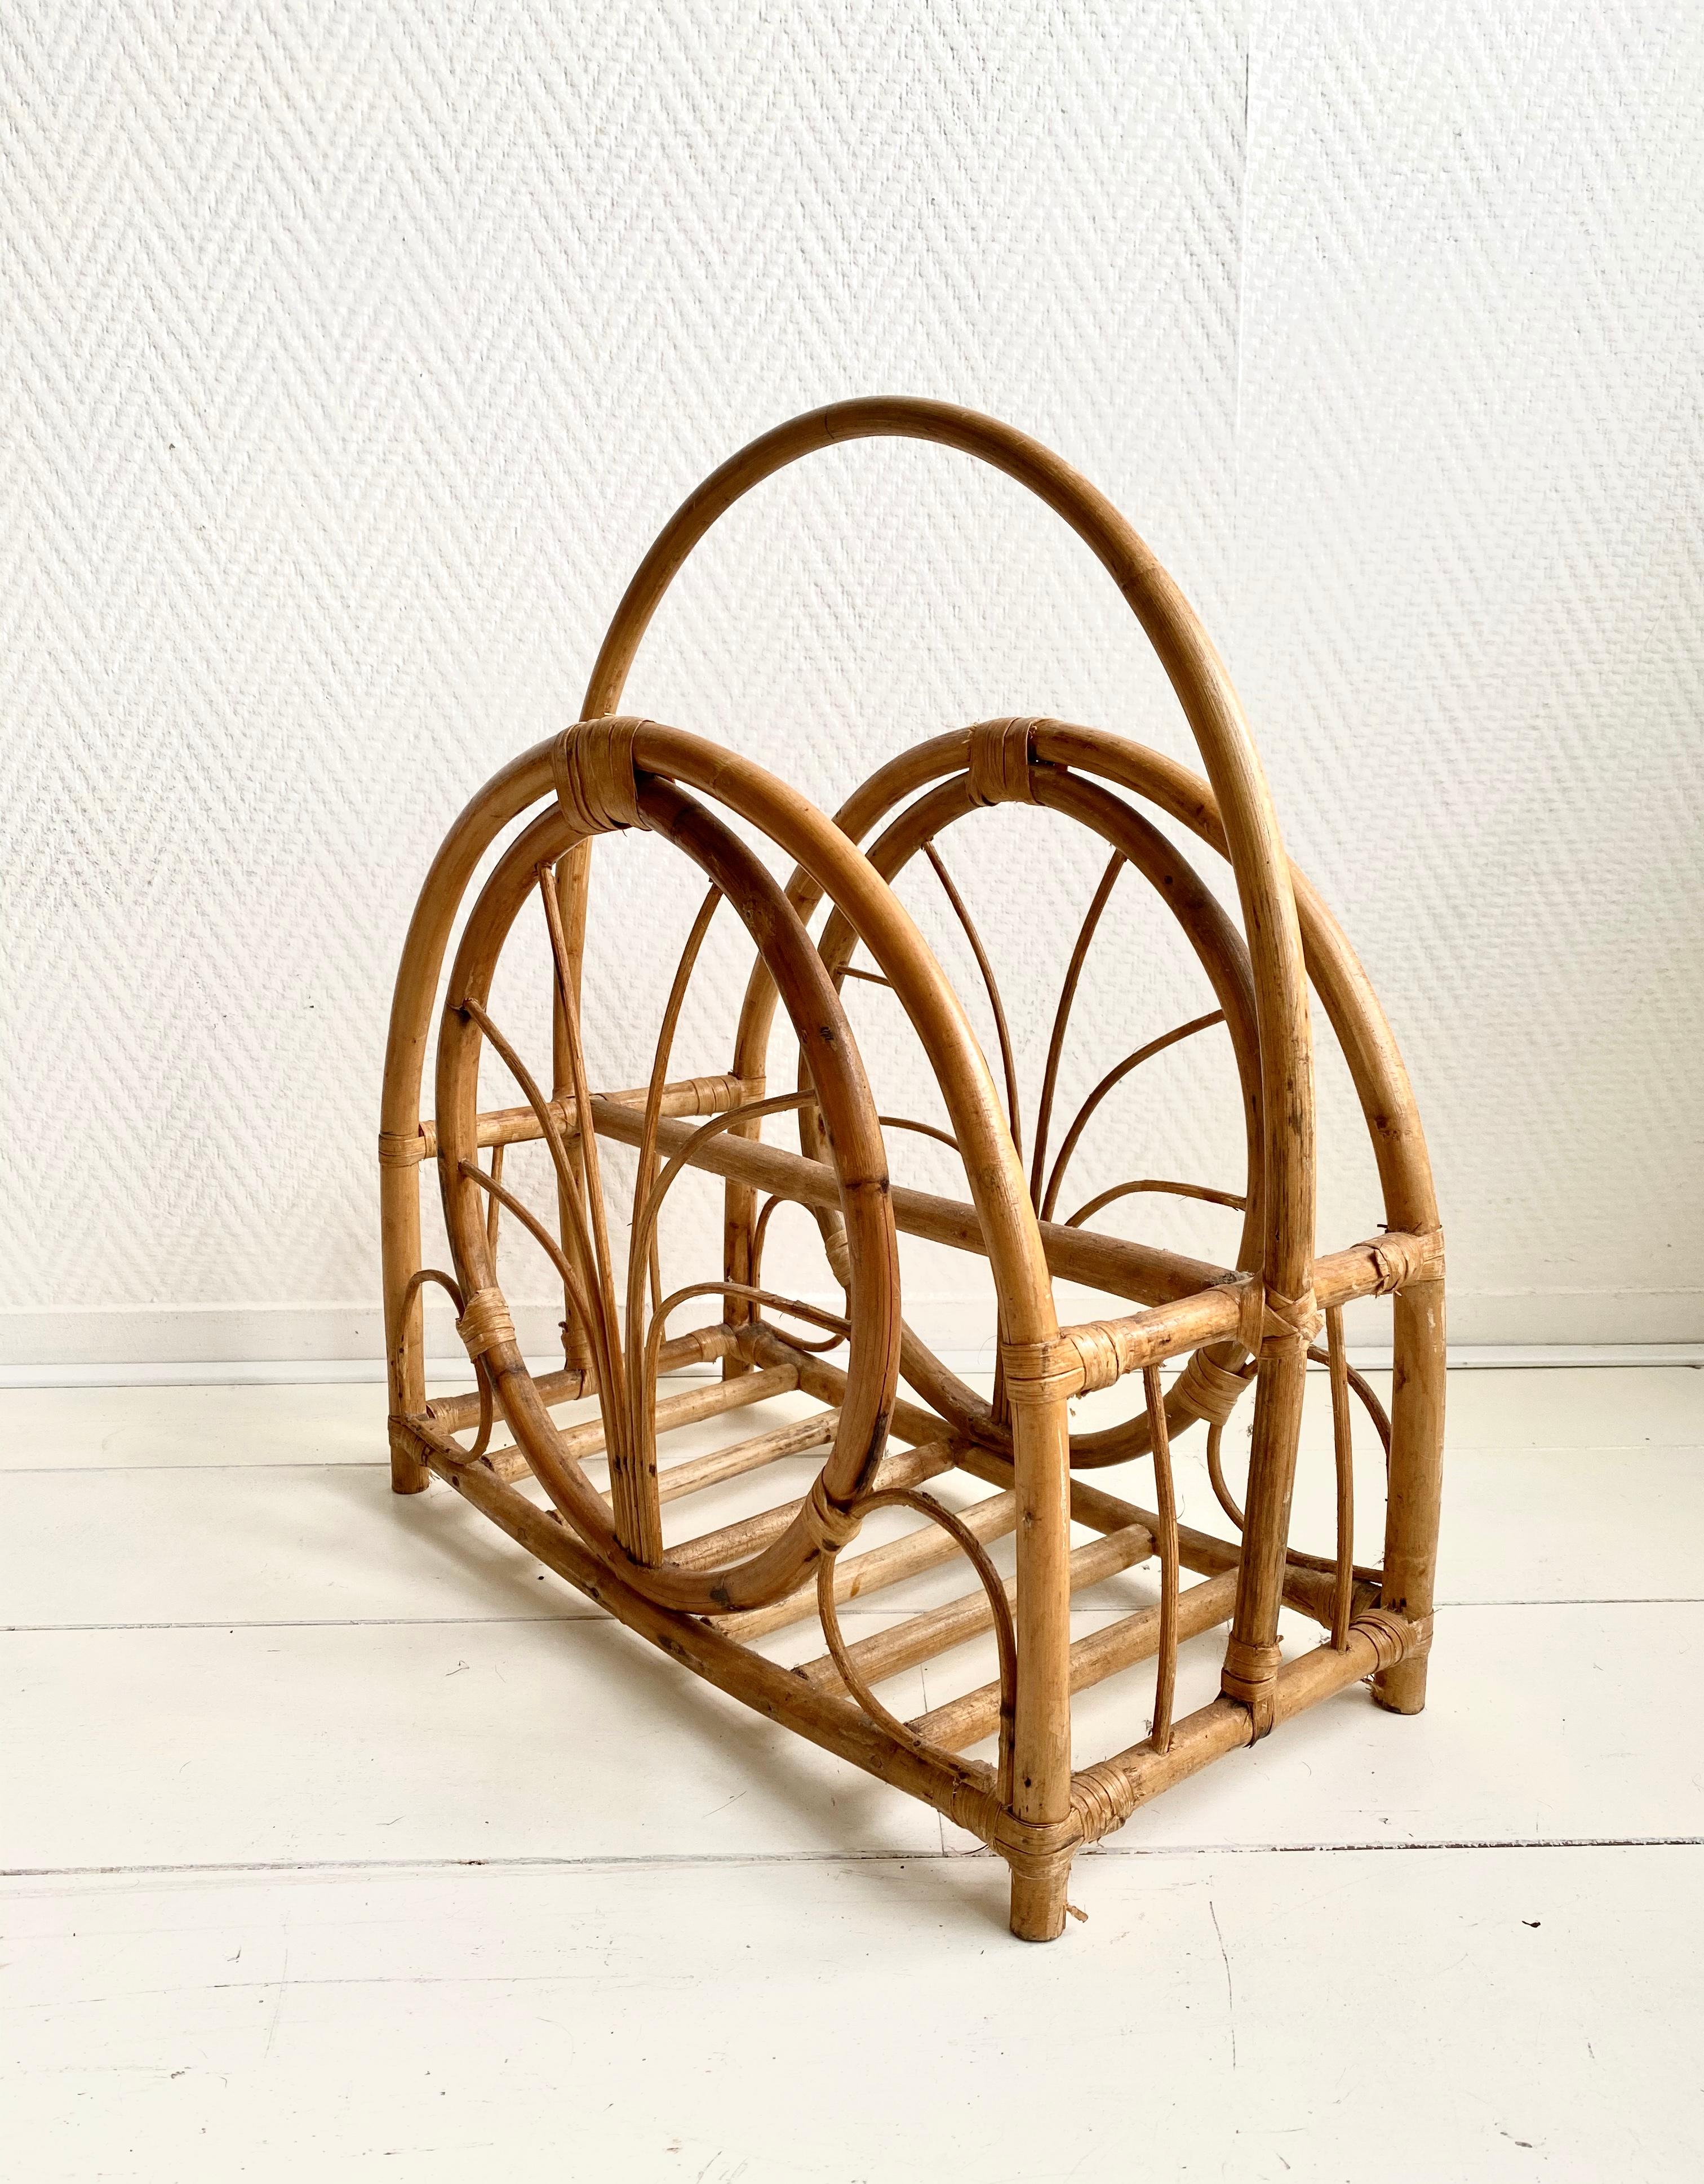 Midcentury Bamboo and Wicker Magazine Holder In Good Condition For Sale In Schagen, NL